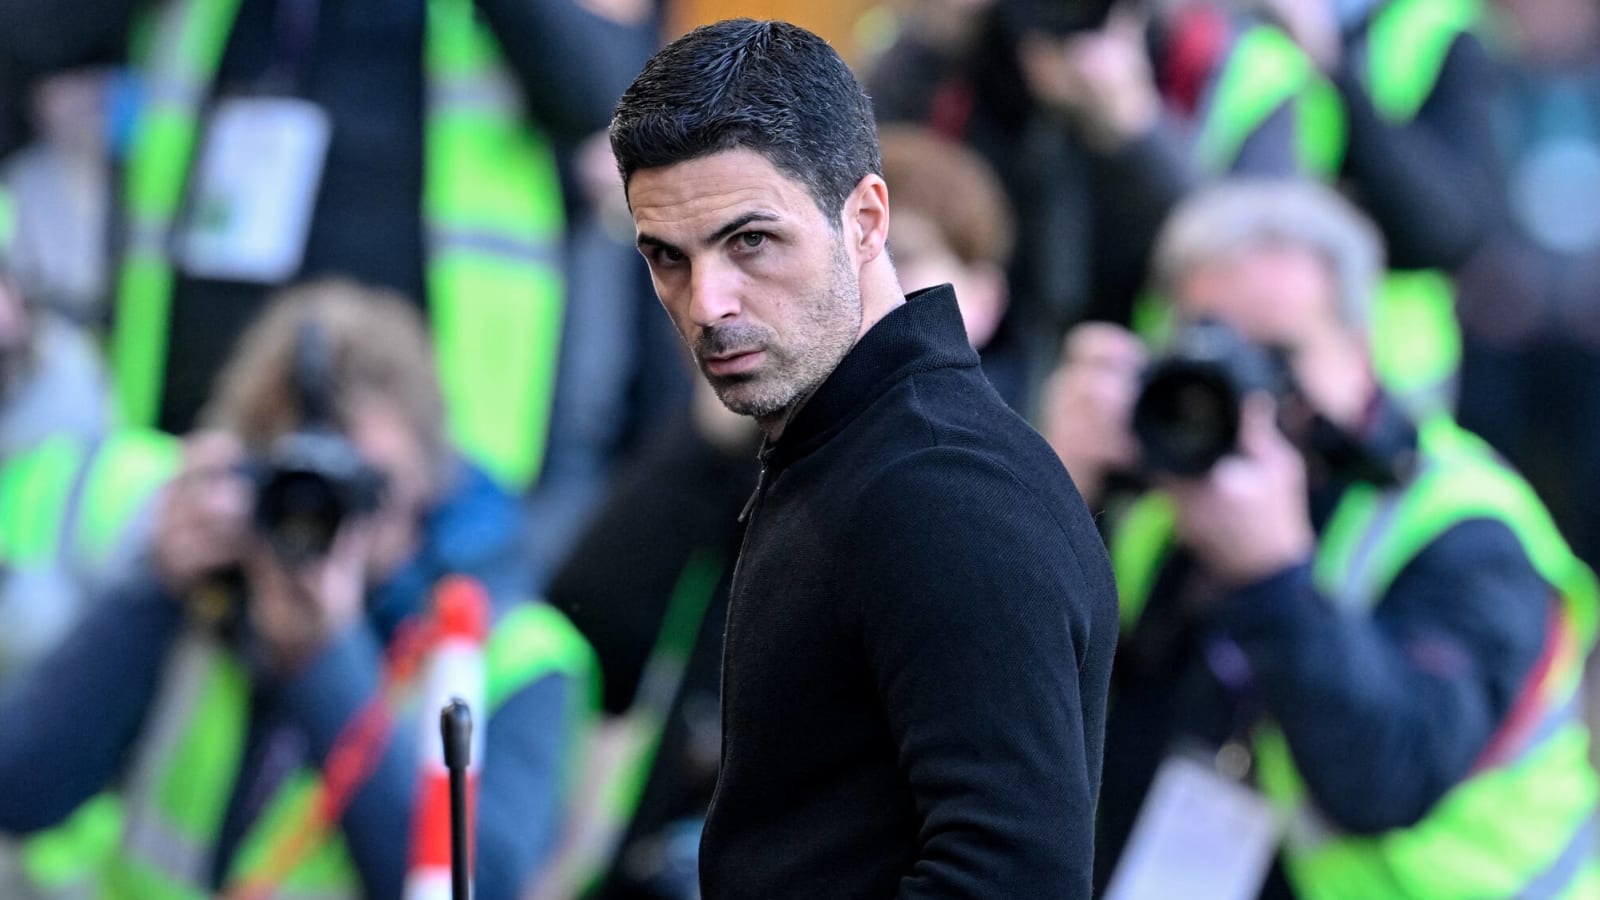 Mikel Arteta insists his team is ready to go against Spurs despite having less rest